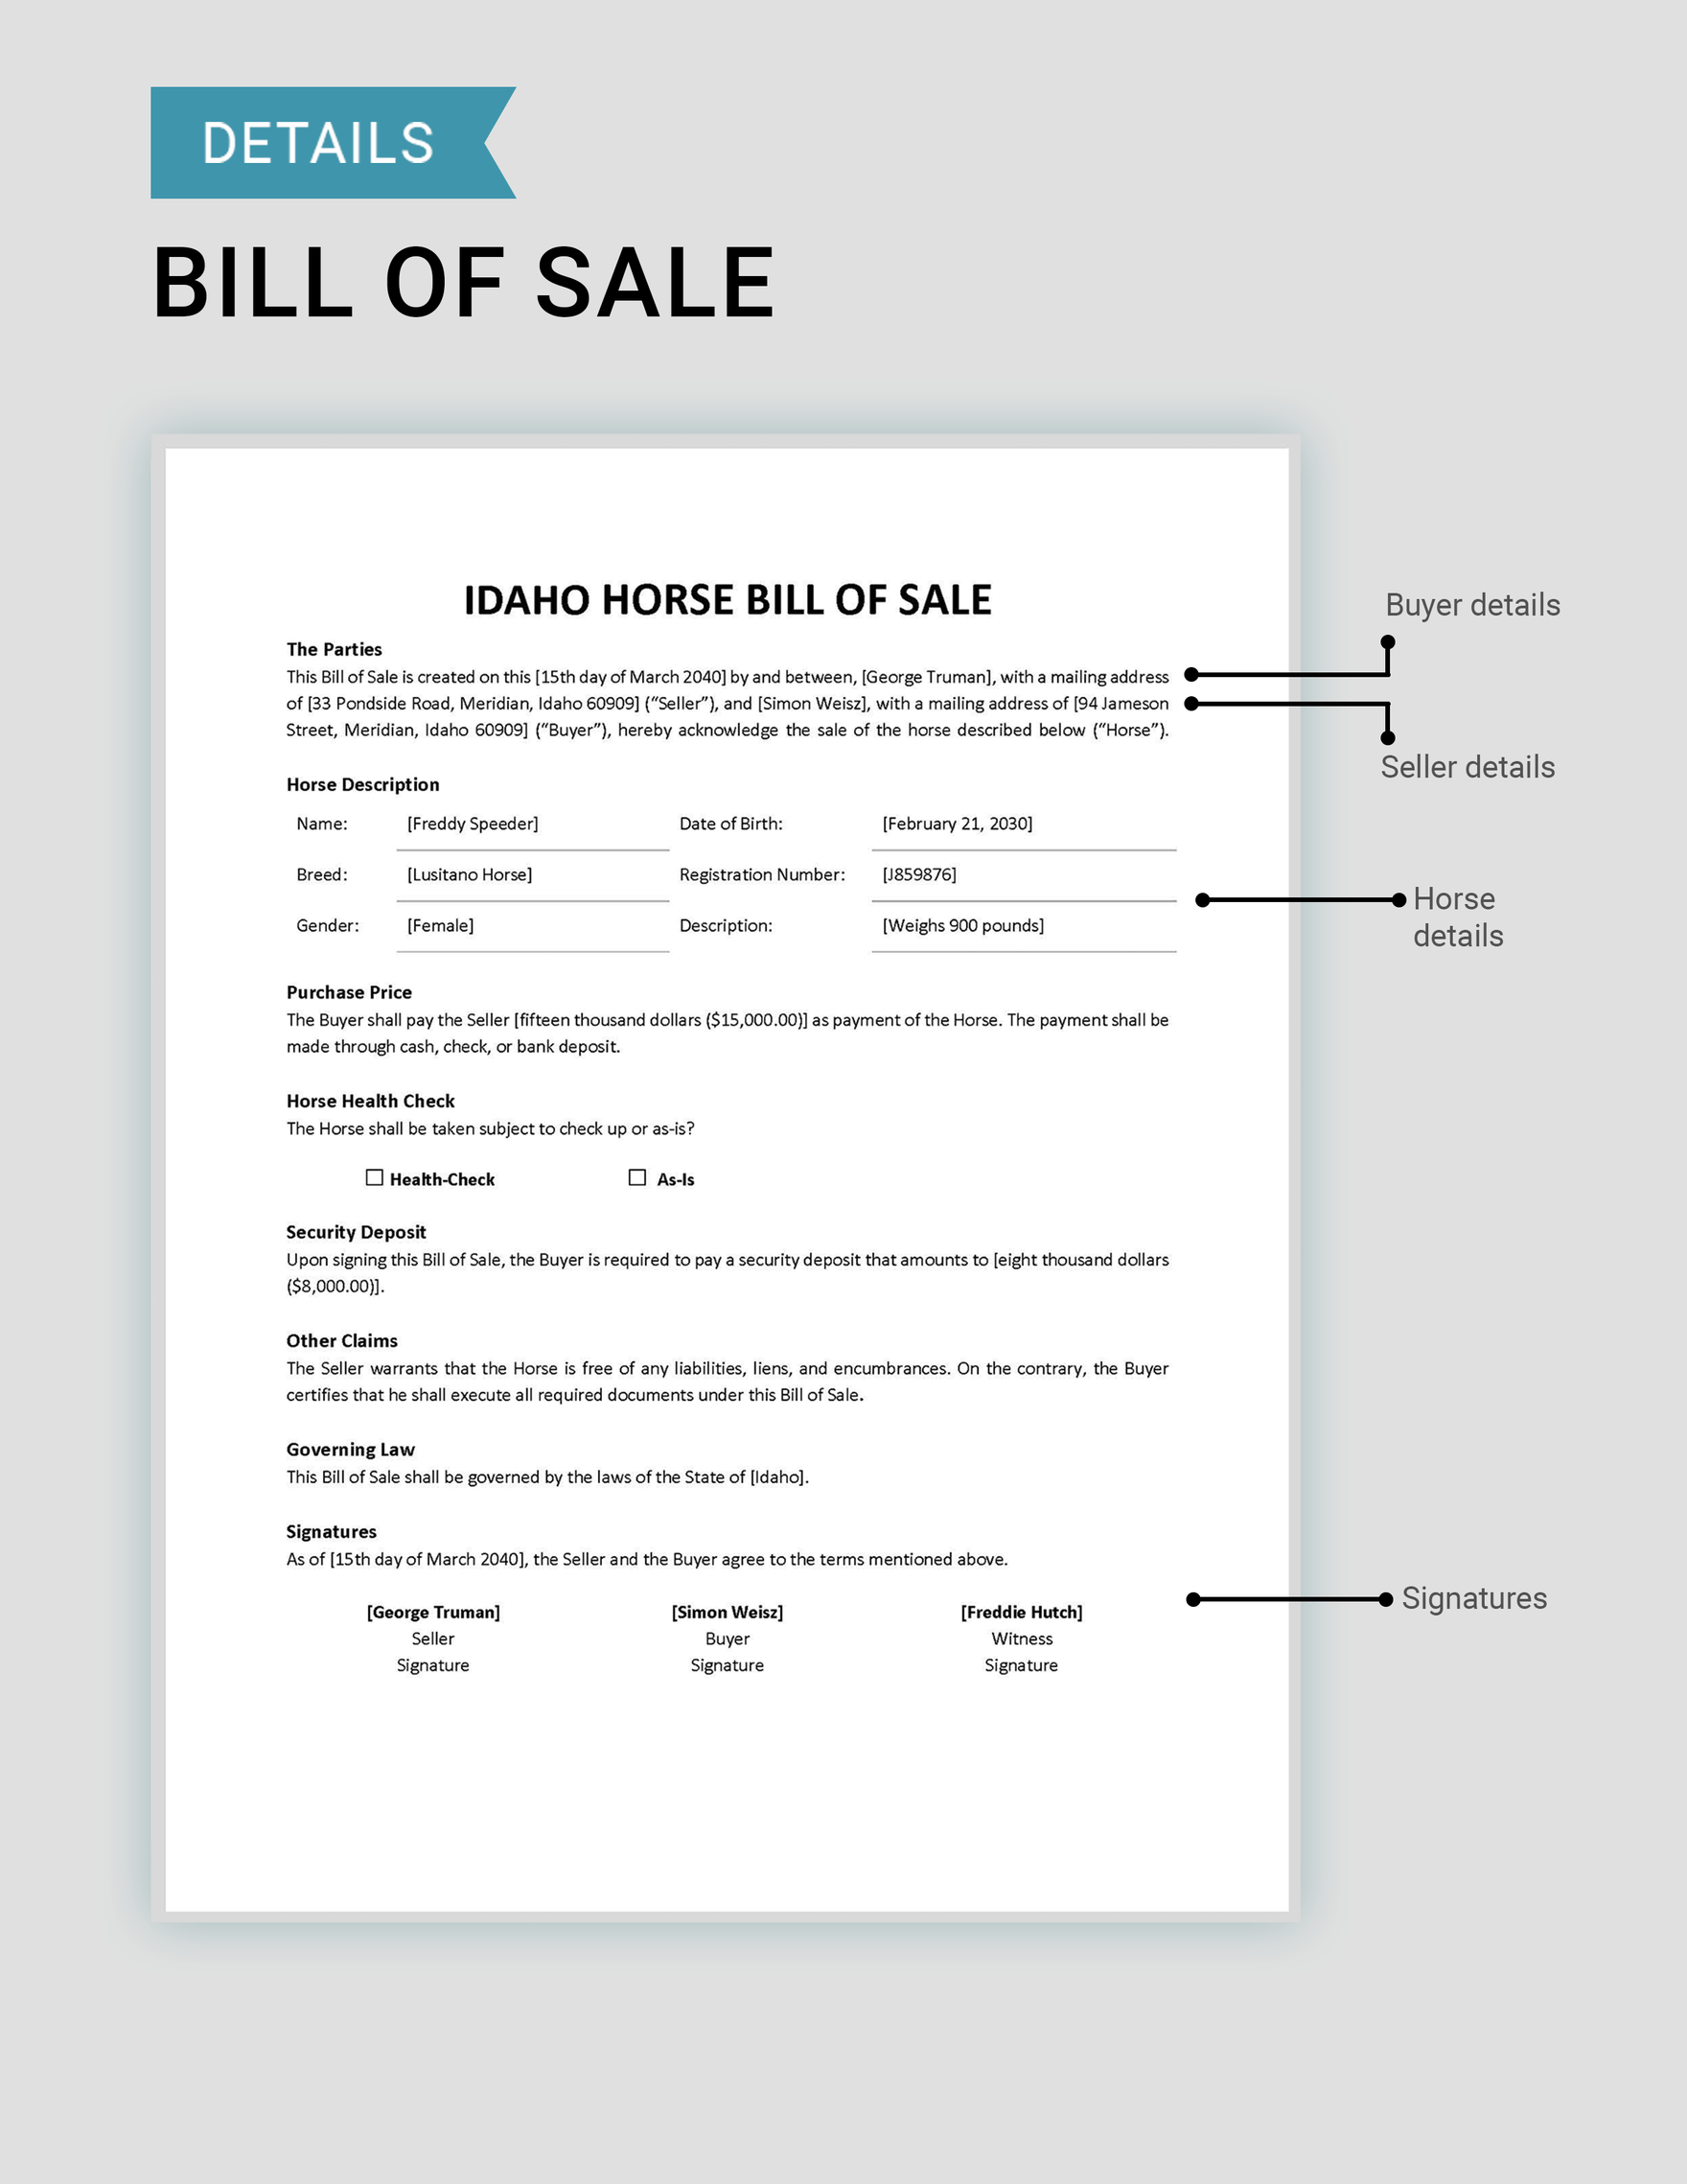 Idaho Horse Bill of Sale Form Template